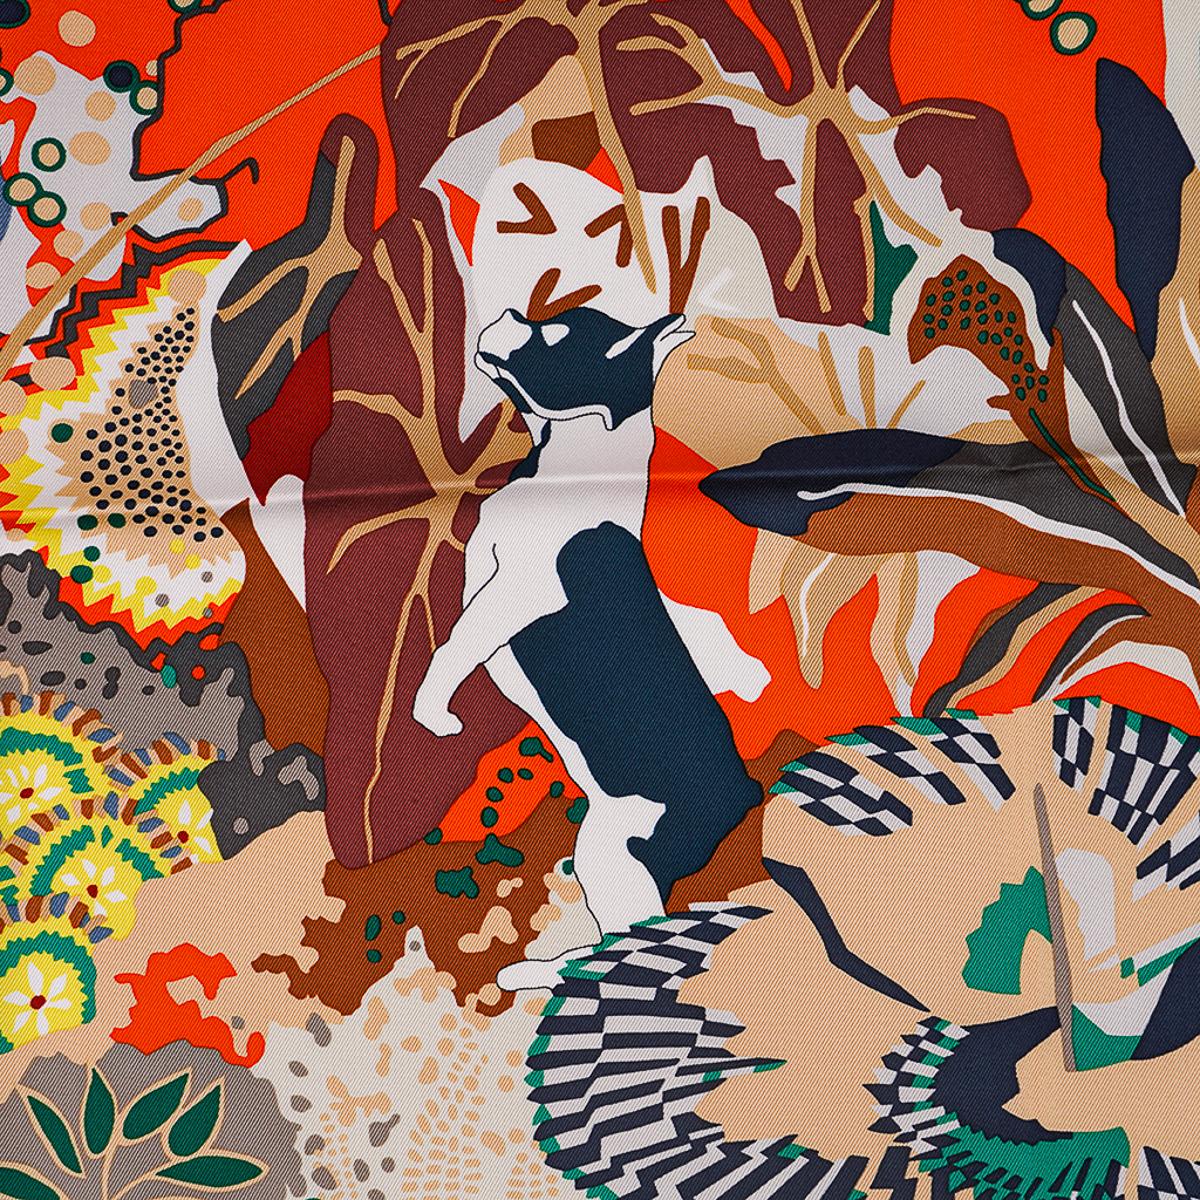 Mightychic offers an Hermes En Liberte! scarf featured in Orange, Vert and Blanc colorway.
Designed by Carine Brancowitz this delightful scene reveals pooches frolicking with the Villa Borghese gardens revealed and the city of Rome in the